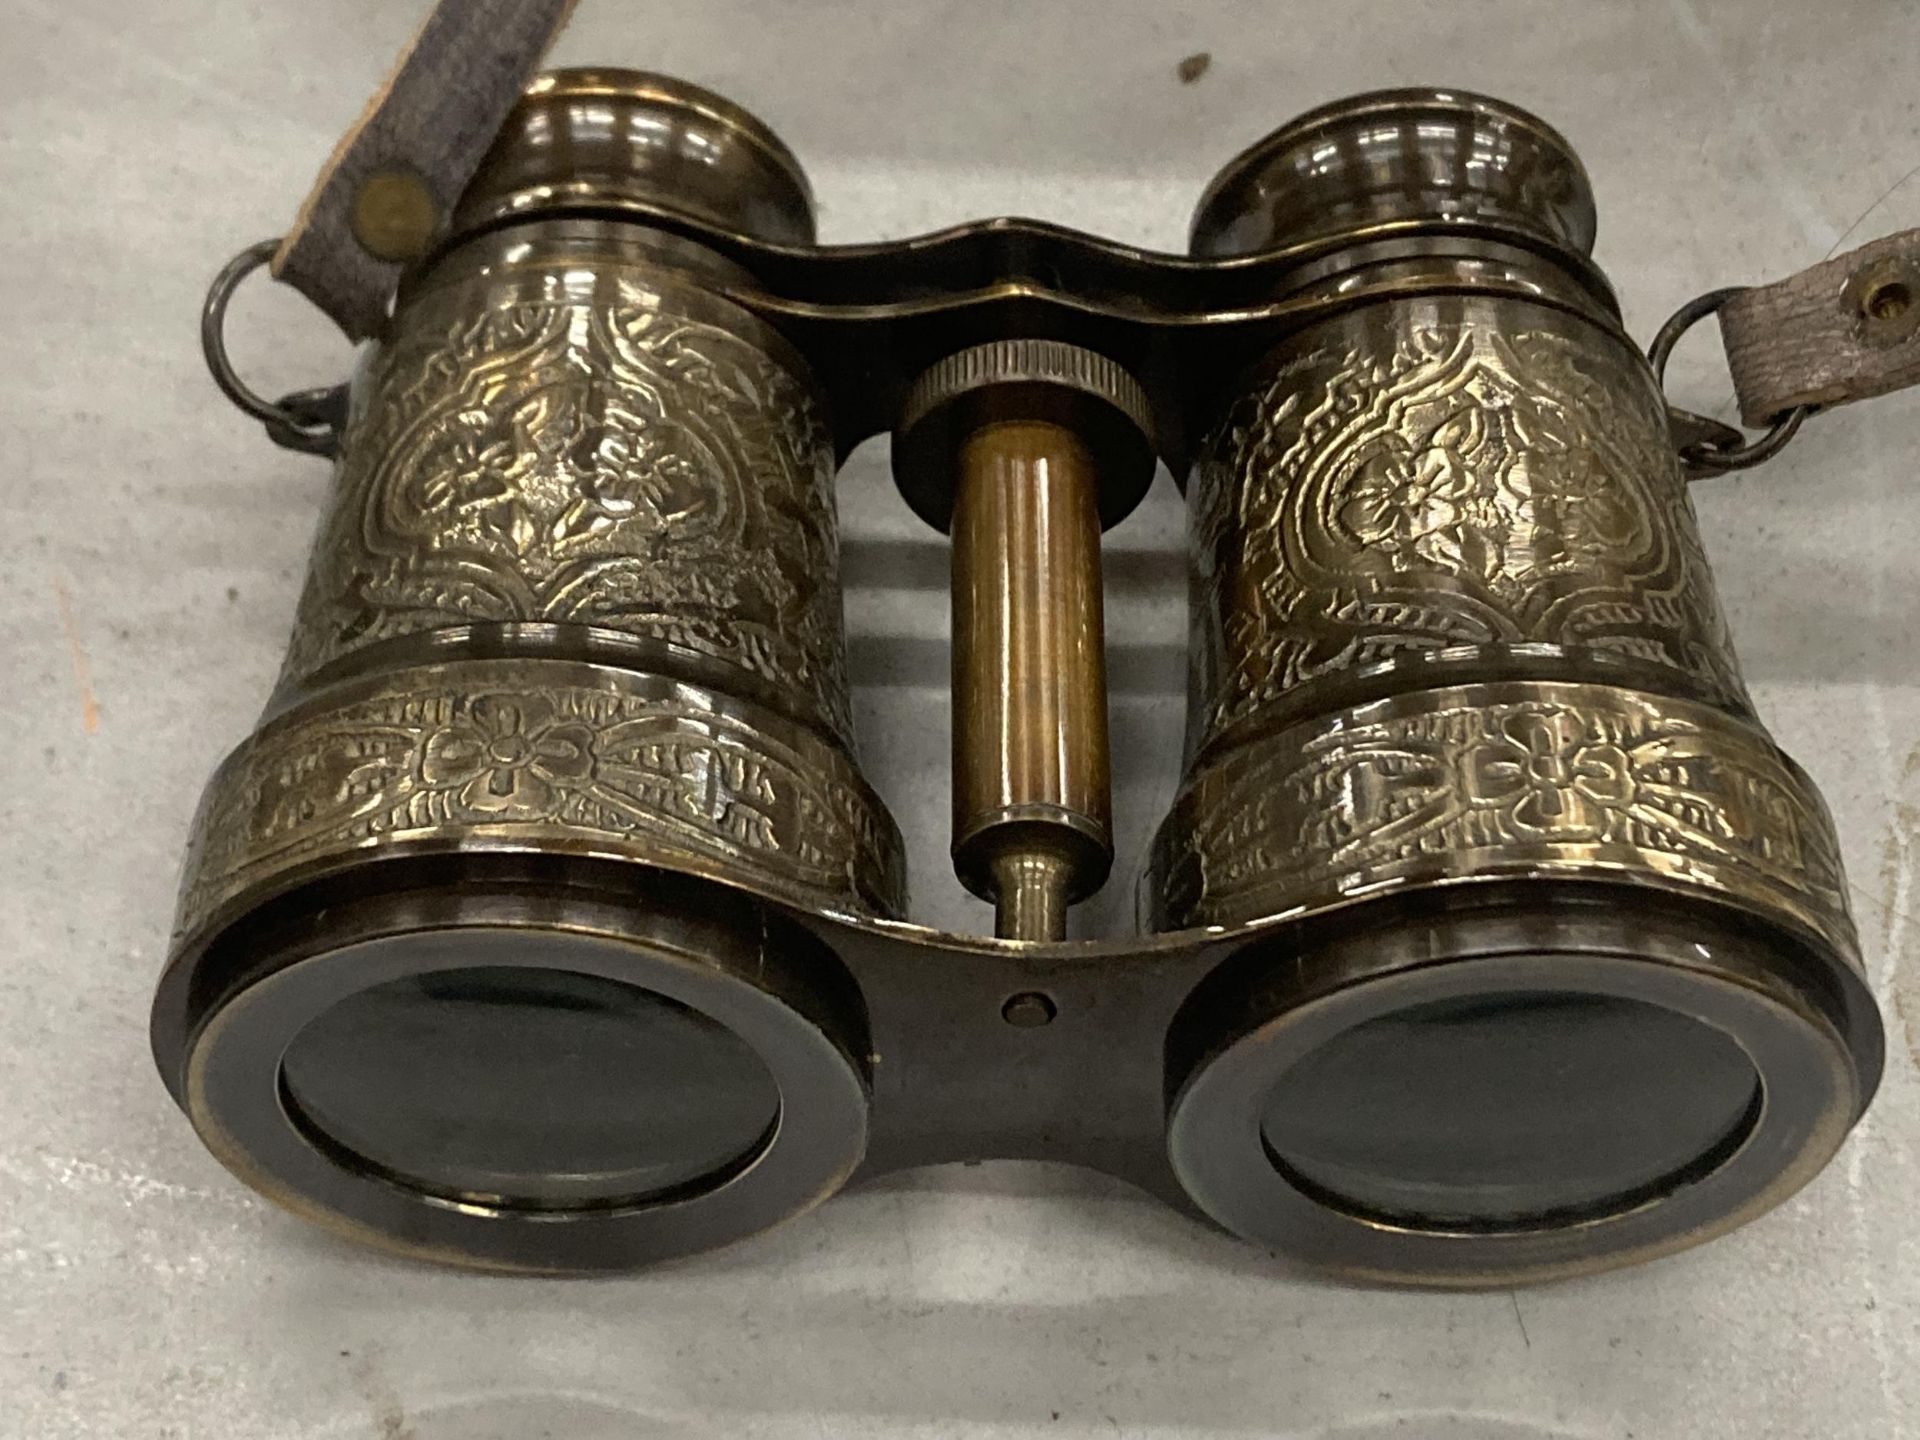 A PAIR OF BRASS BINOCULARS IN A LEATHER CASE - Image 2 of 3